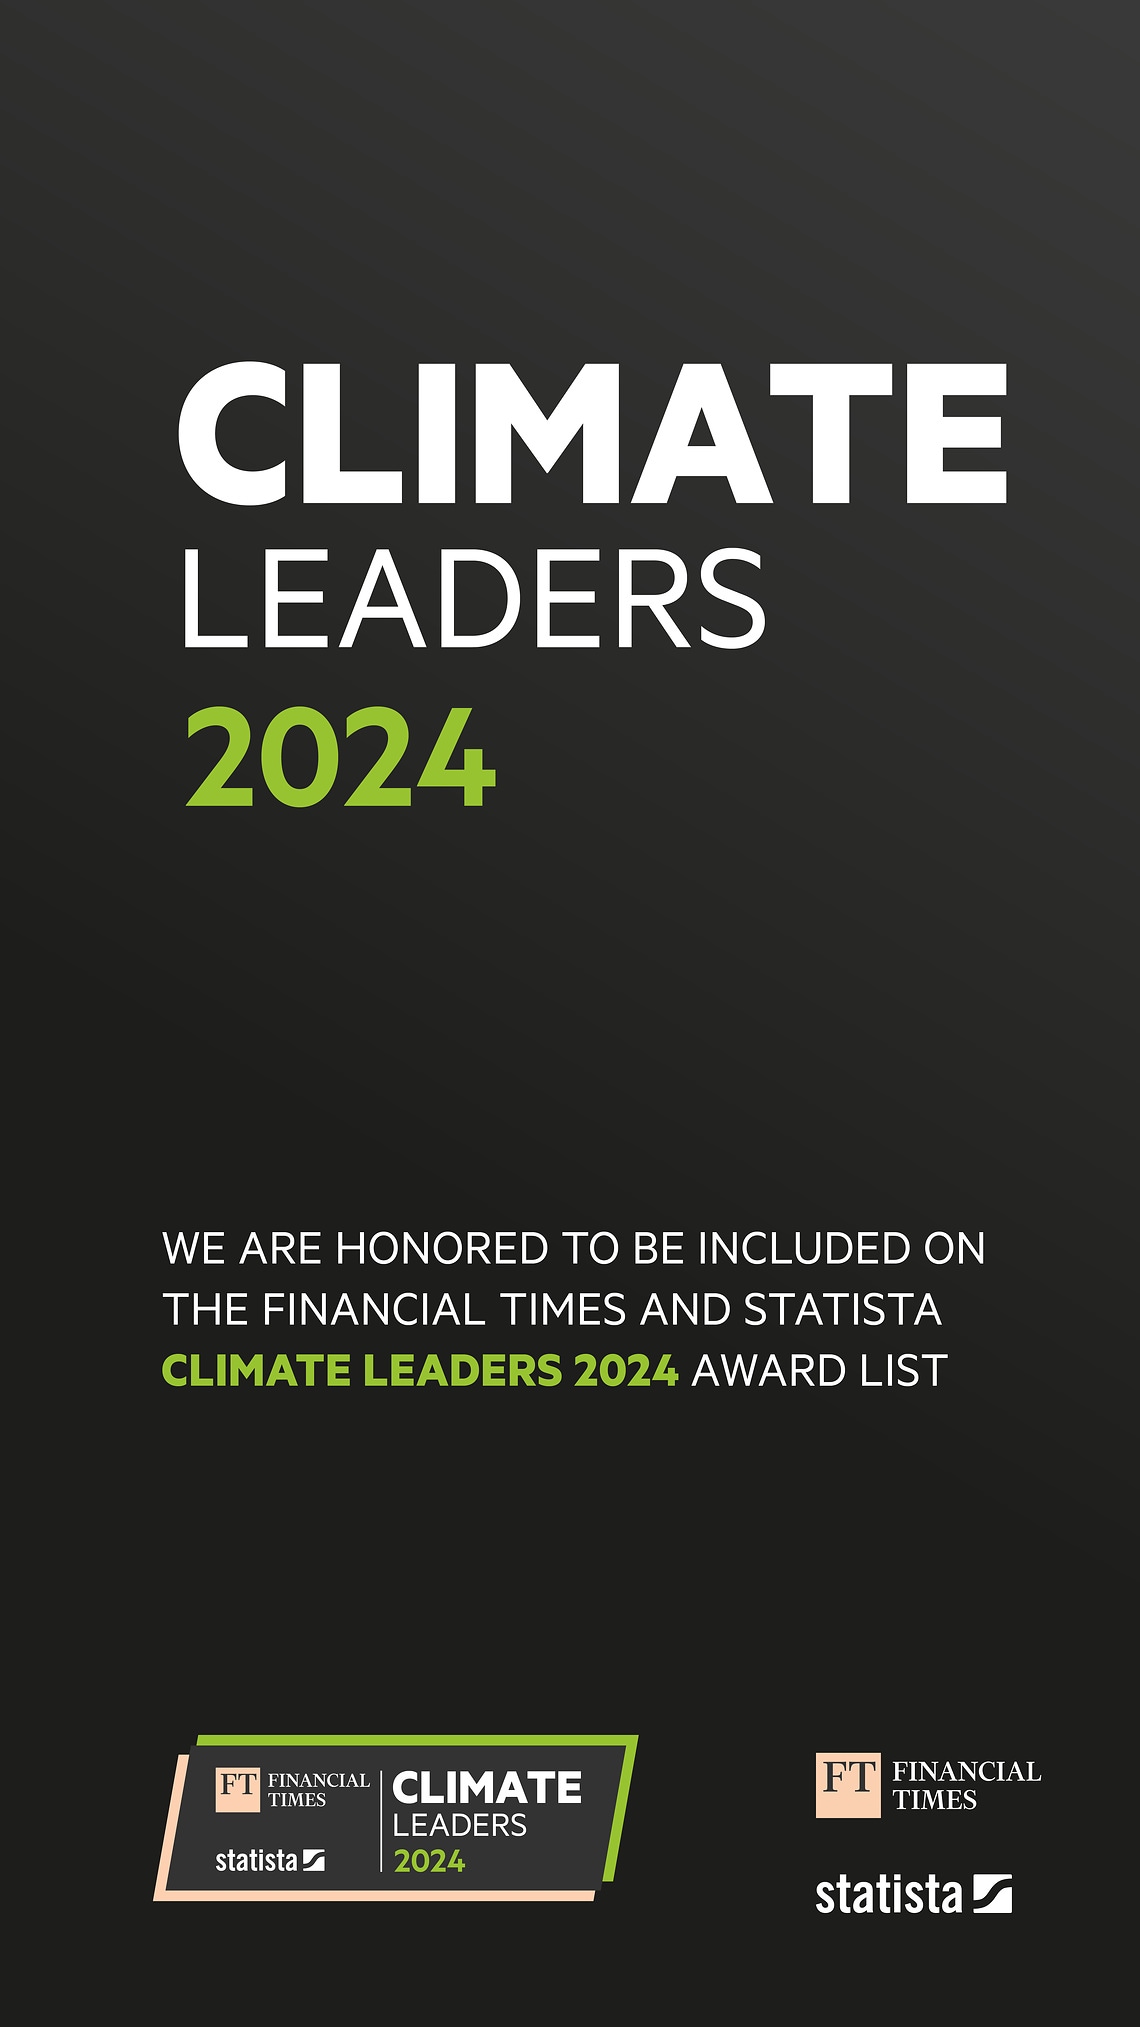 Europe's Climate Leaders 2024 Material